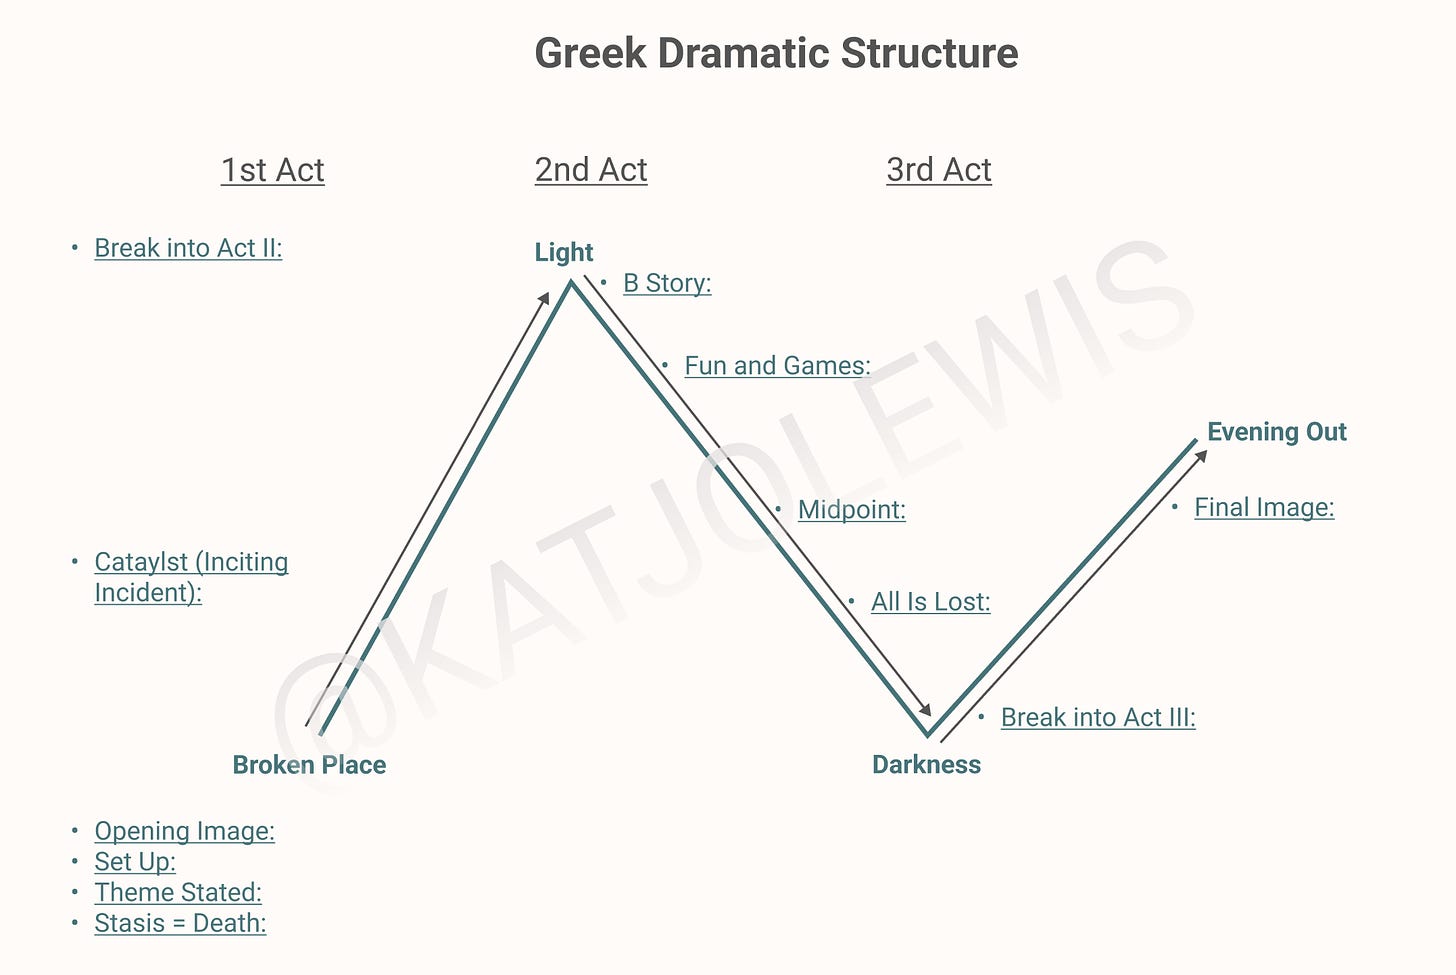 An N-shaped structure that is broken into three acts. Act I consists of the Broken Place, the Set Up, Theme Stated, Stasis equals Death, the Catalyst (or Inciting Incident), and the Break into Act II. Act II consists of the B Story, Fun and Games, Midpoint, All Is Lost, and Break into Act III. Act III consists of the Final Image.